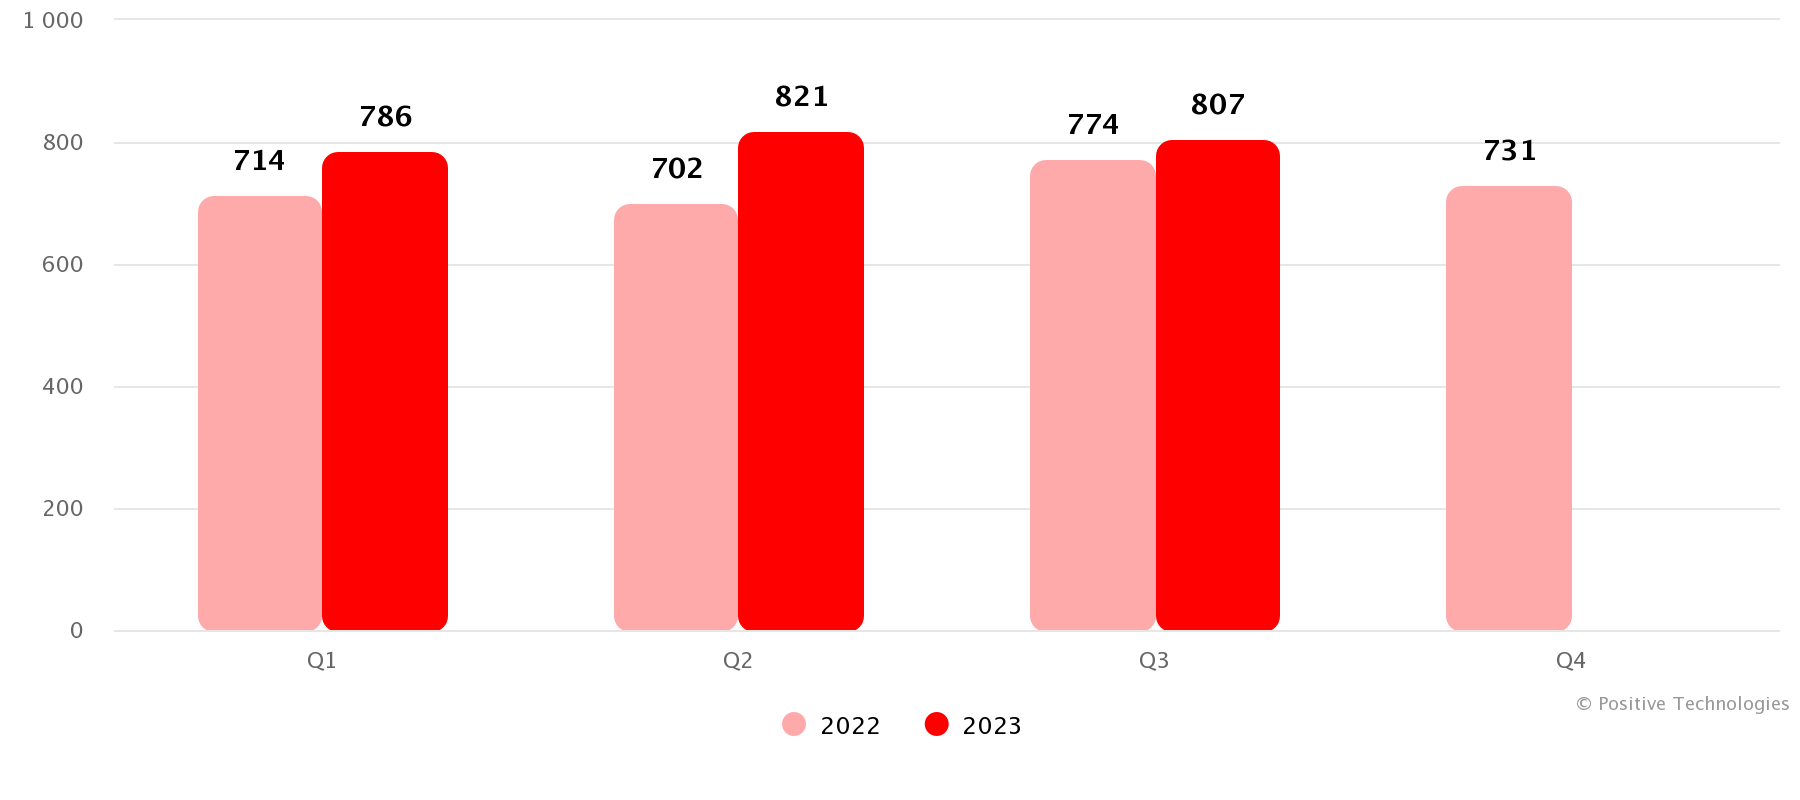 Number of attacks in 2022 and 2023 (by quarter)